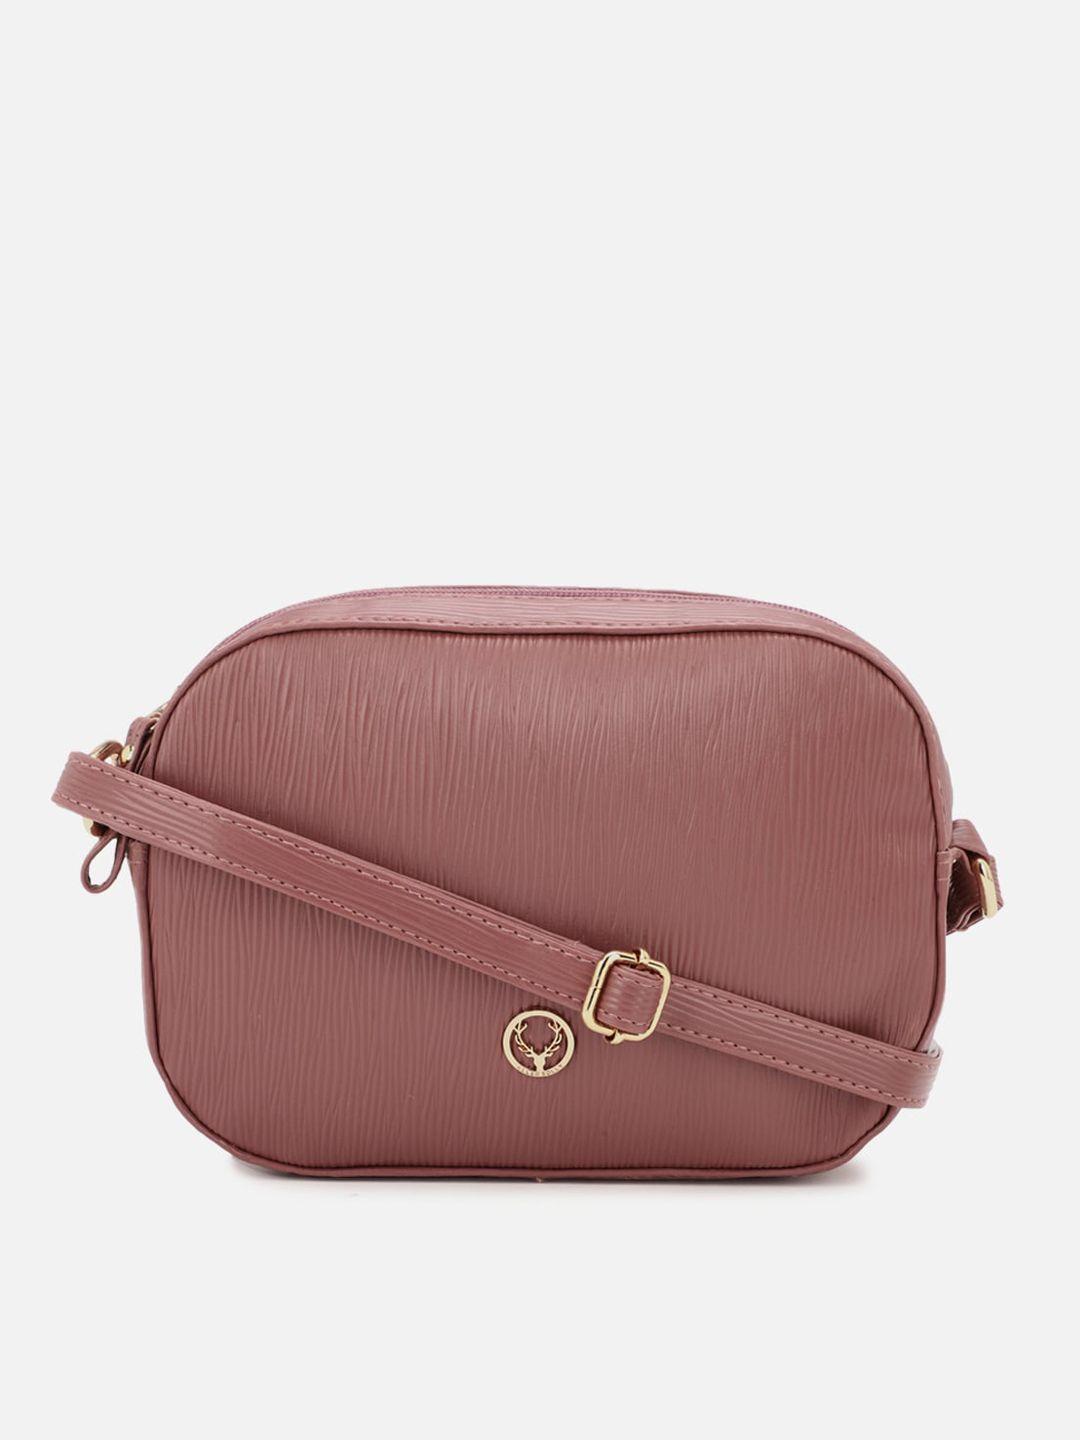 allen solly pink textured pu structured sling bag